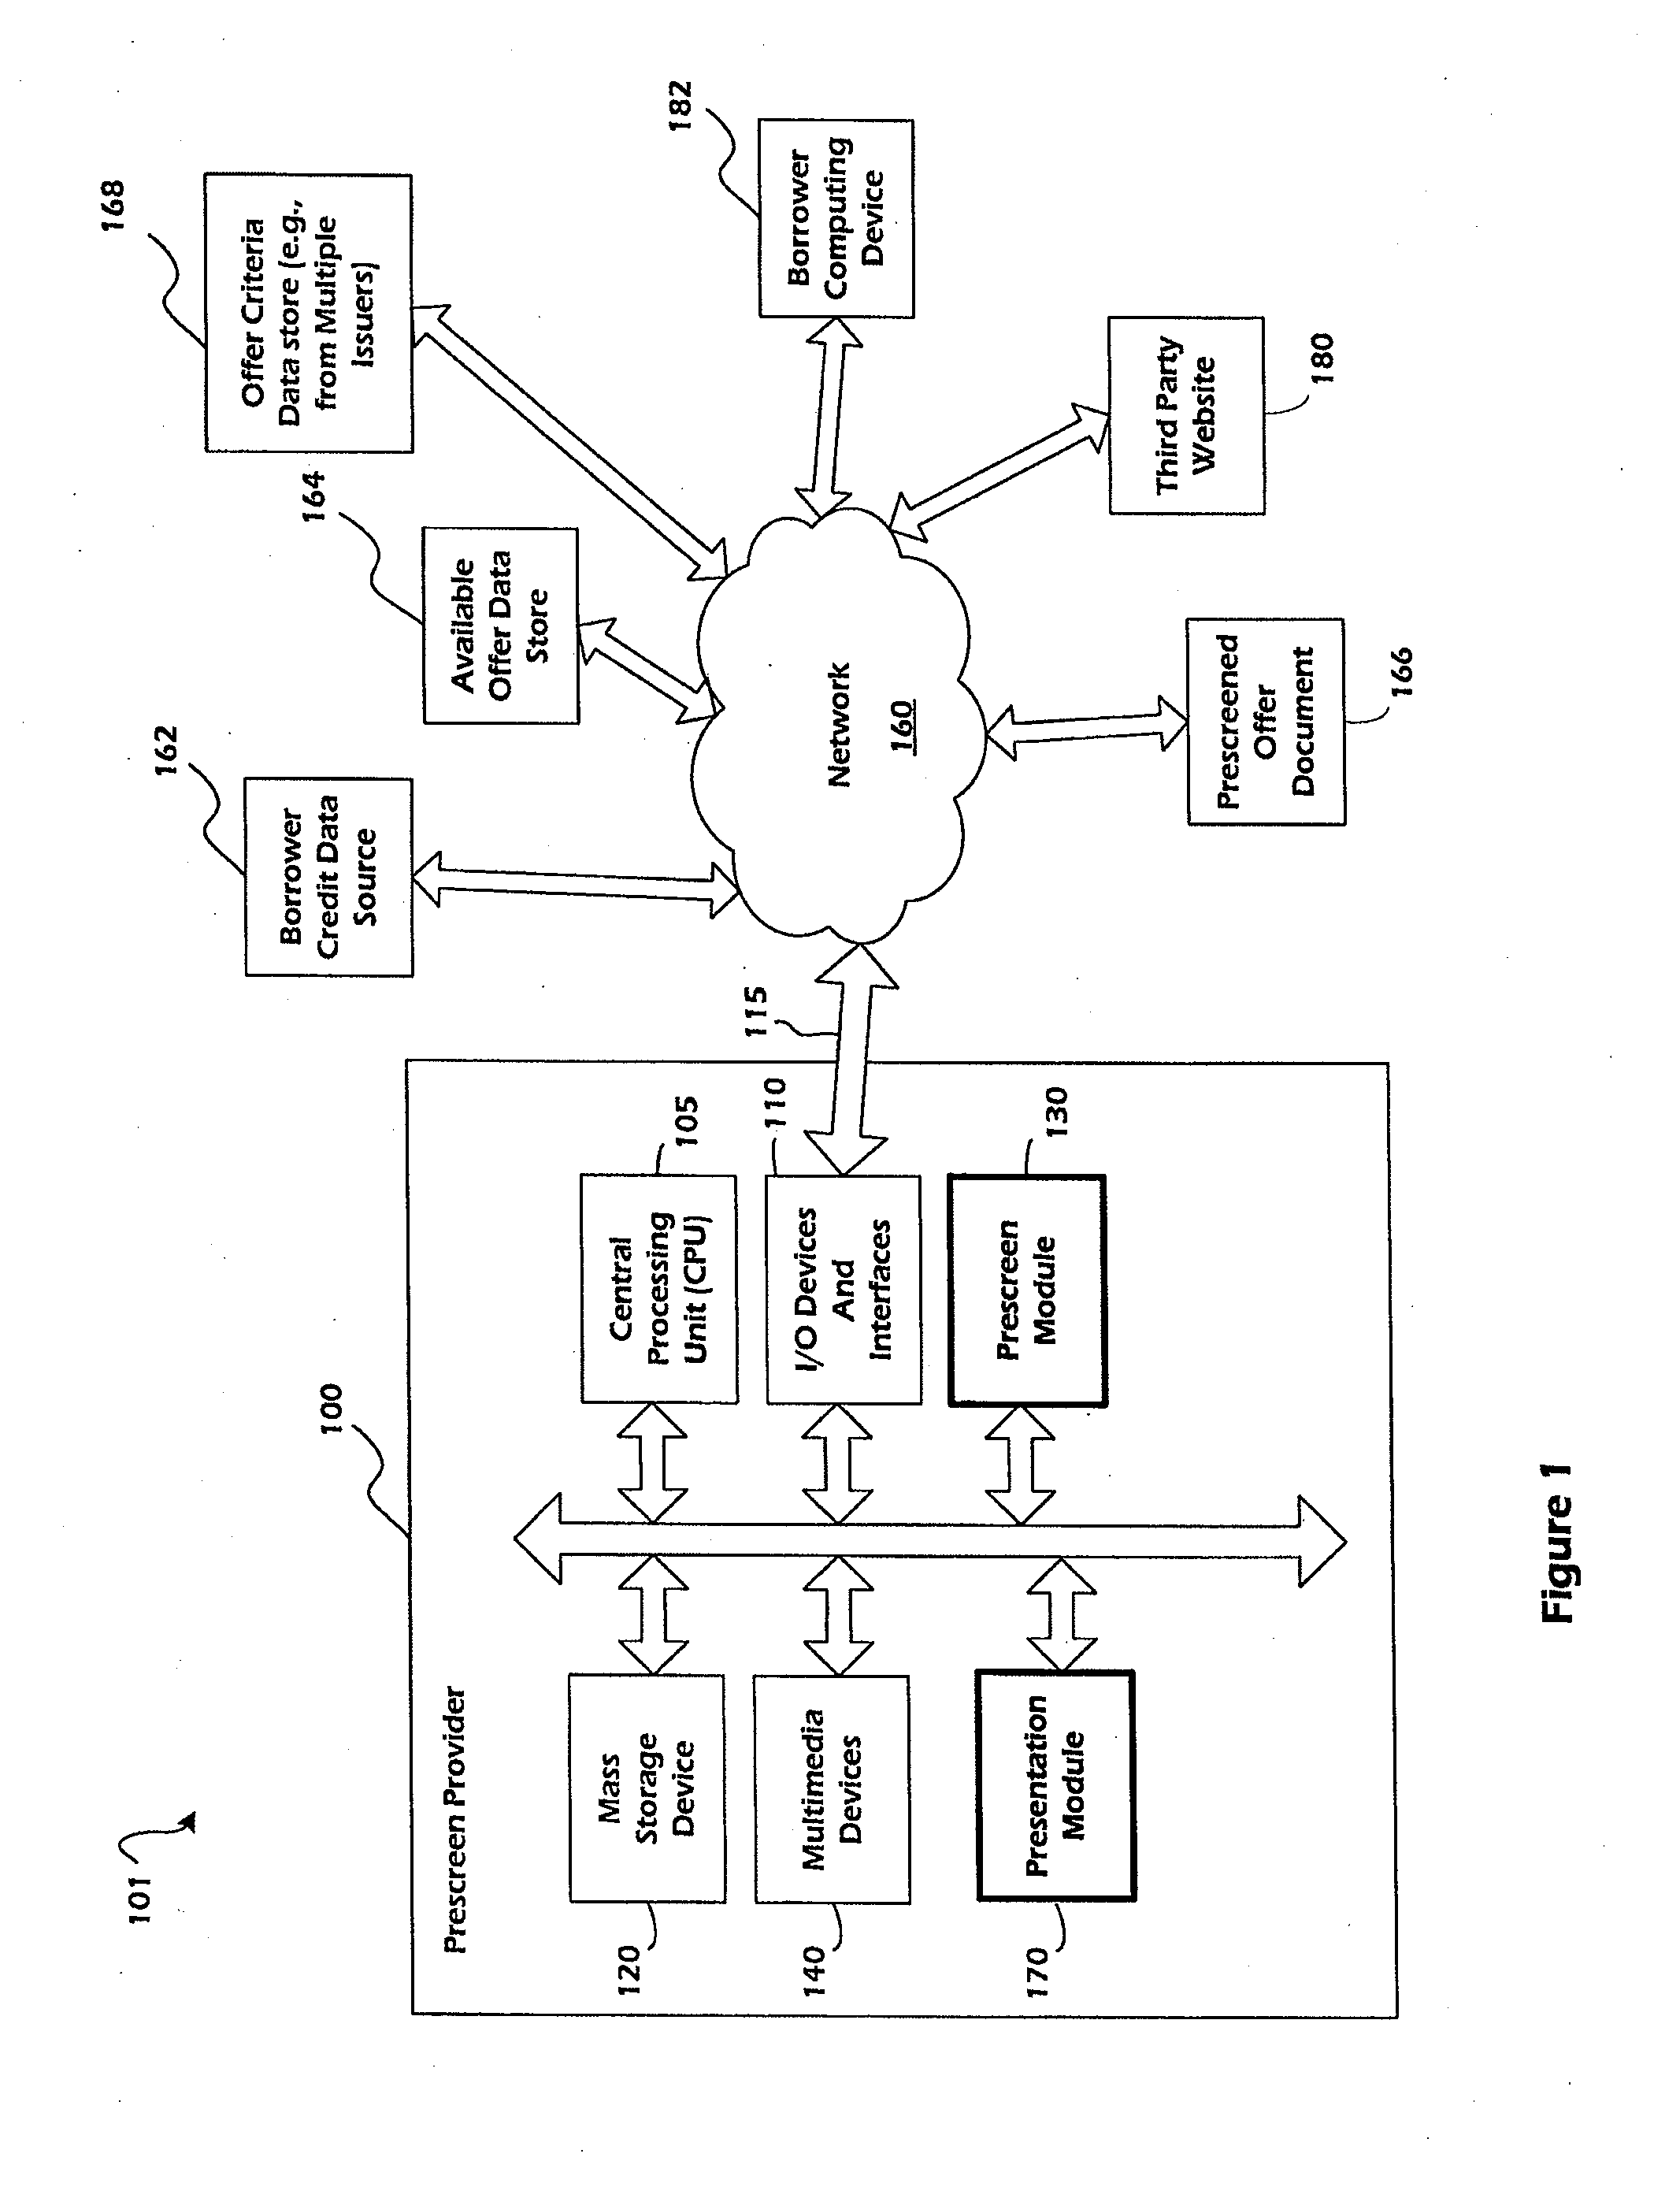 Online credit card prescreen systems and methods